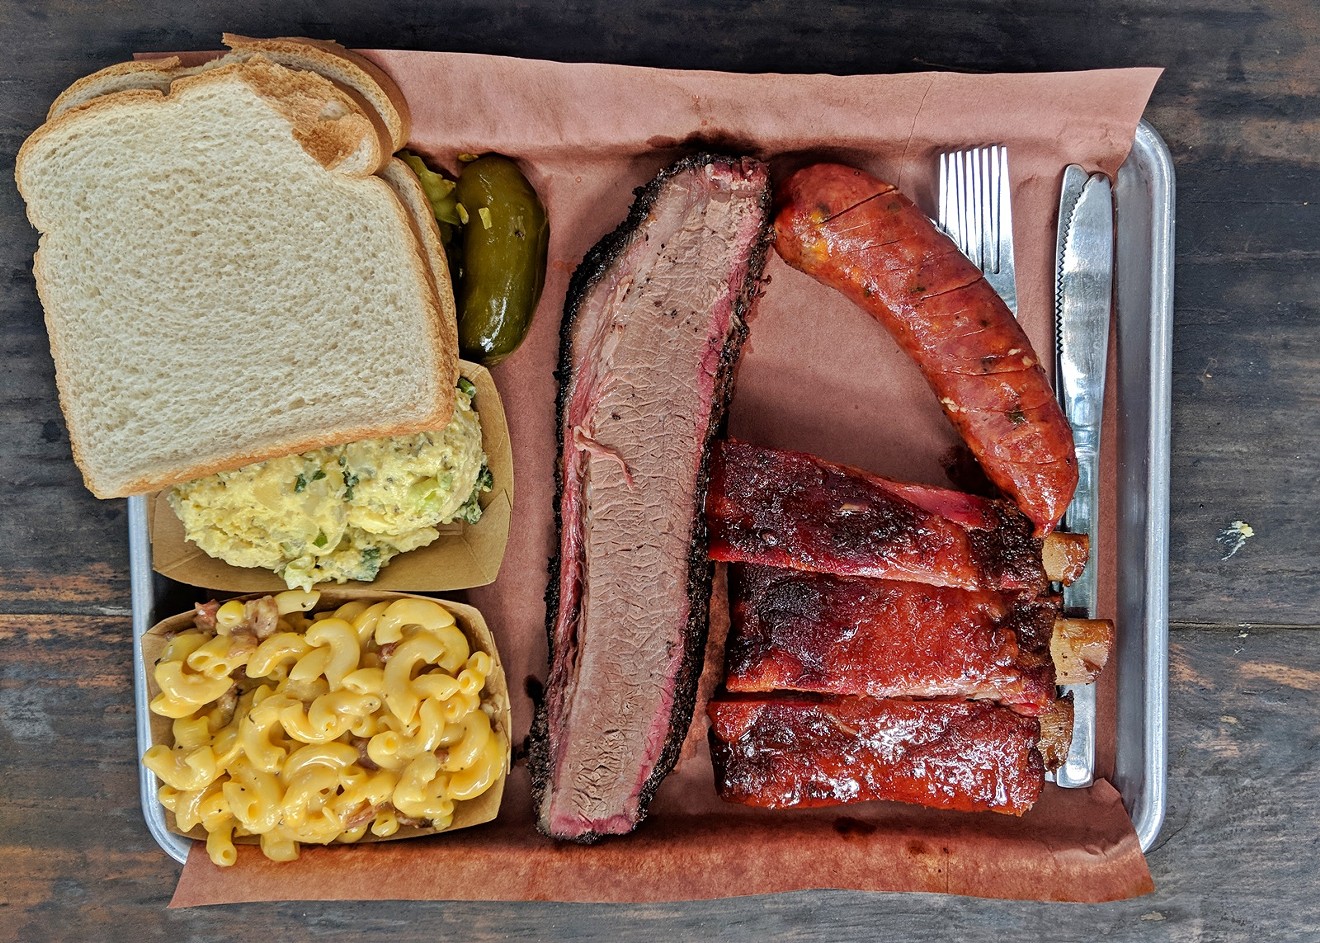 A full spread from Pinkerton's Barbecue